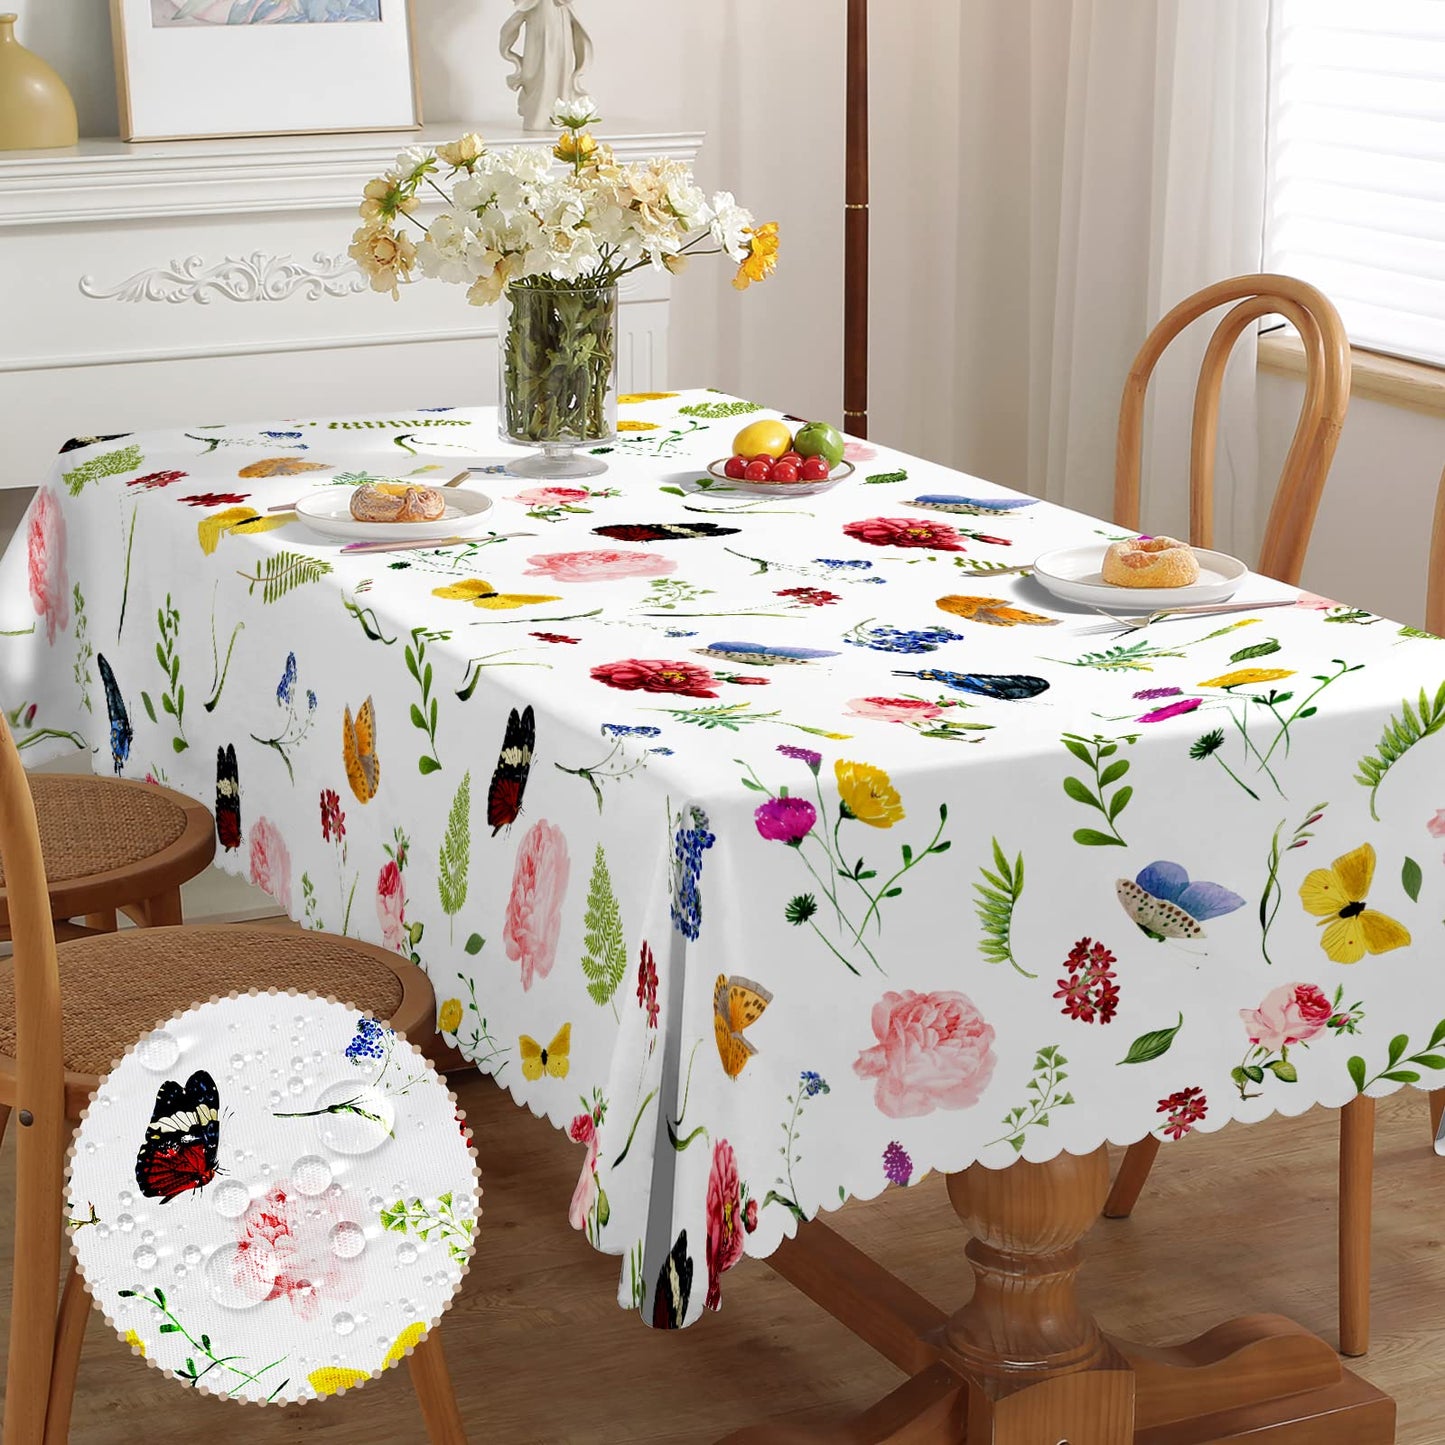 MAST DOO Floral Tablecloths for Rectangle Tables, Spring Table Cloth, Waterproof Stain Resistant Wrinkle-Free Table Cover for Home Kitchen Dining Party Patio Indoor Outdoor Use 55x70 Inch